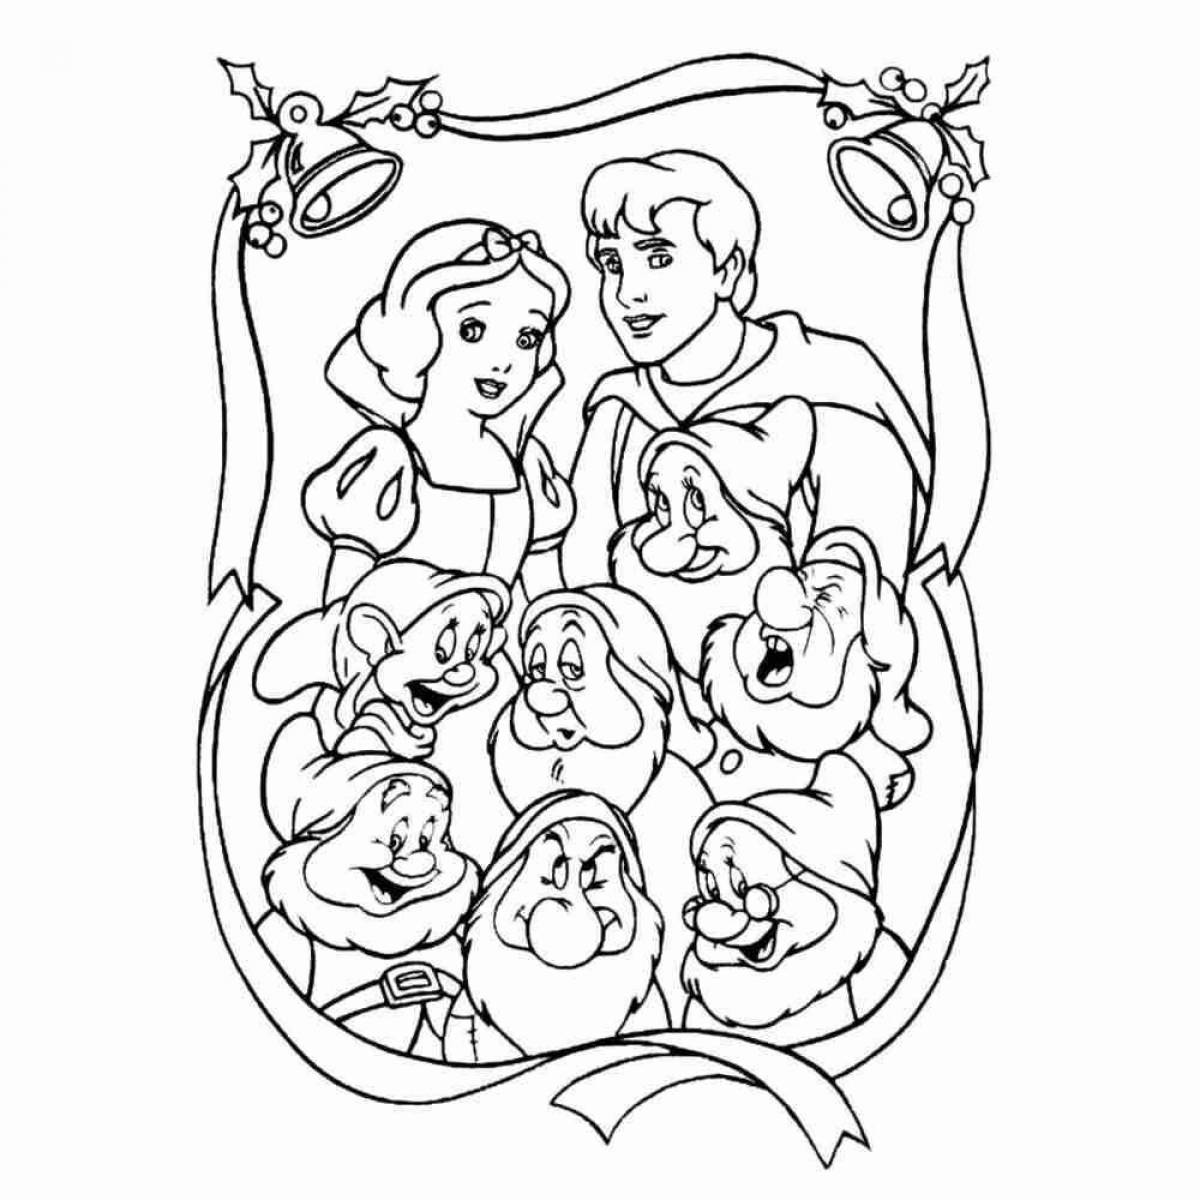 Charming snow white and 7 dwarfs coloring book